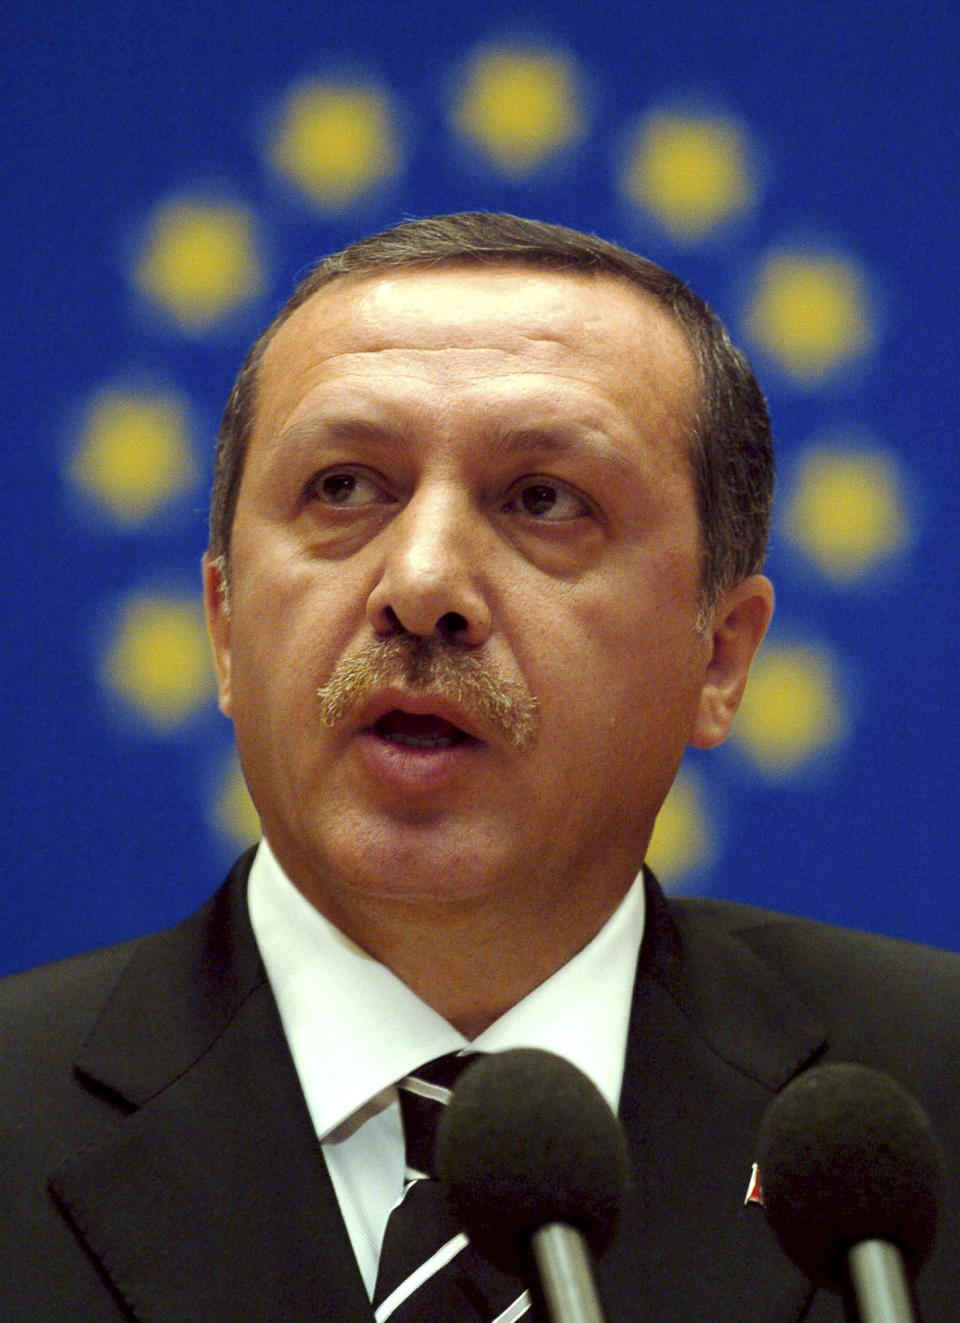 FILE - Turkey's Prime Minister Recep Tayyip Erdogan addresses the parliamentary assembly of the Council of Europe on Oct. 6, 2004 in Strasbourg, eastern France. Erdogan, who is seeking a third term in office as president in elections in May, marks 20 years in office on Tuesday, March 14, 2023. (AP Photo/Christian Lutz, File)